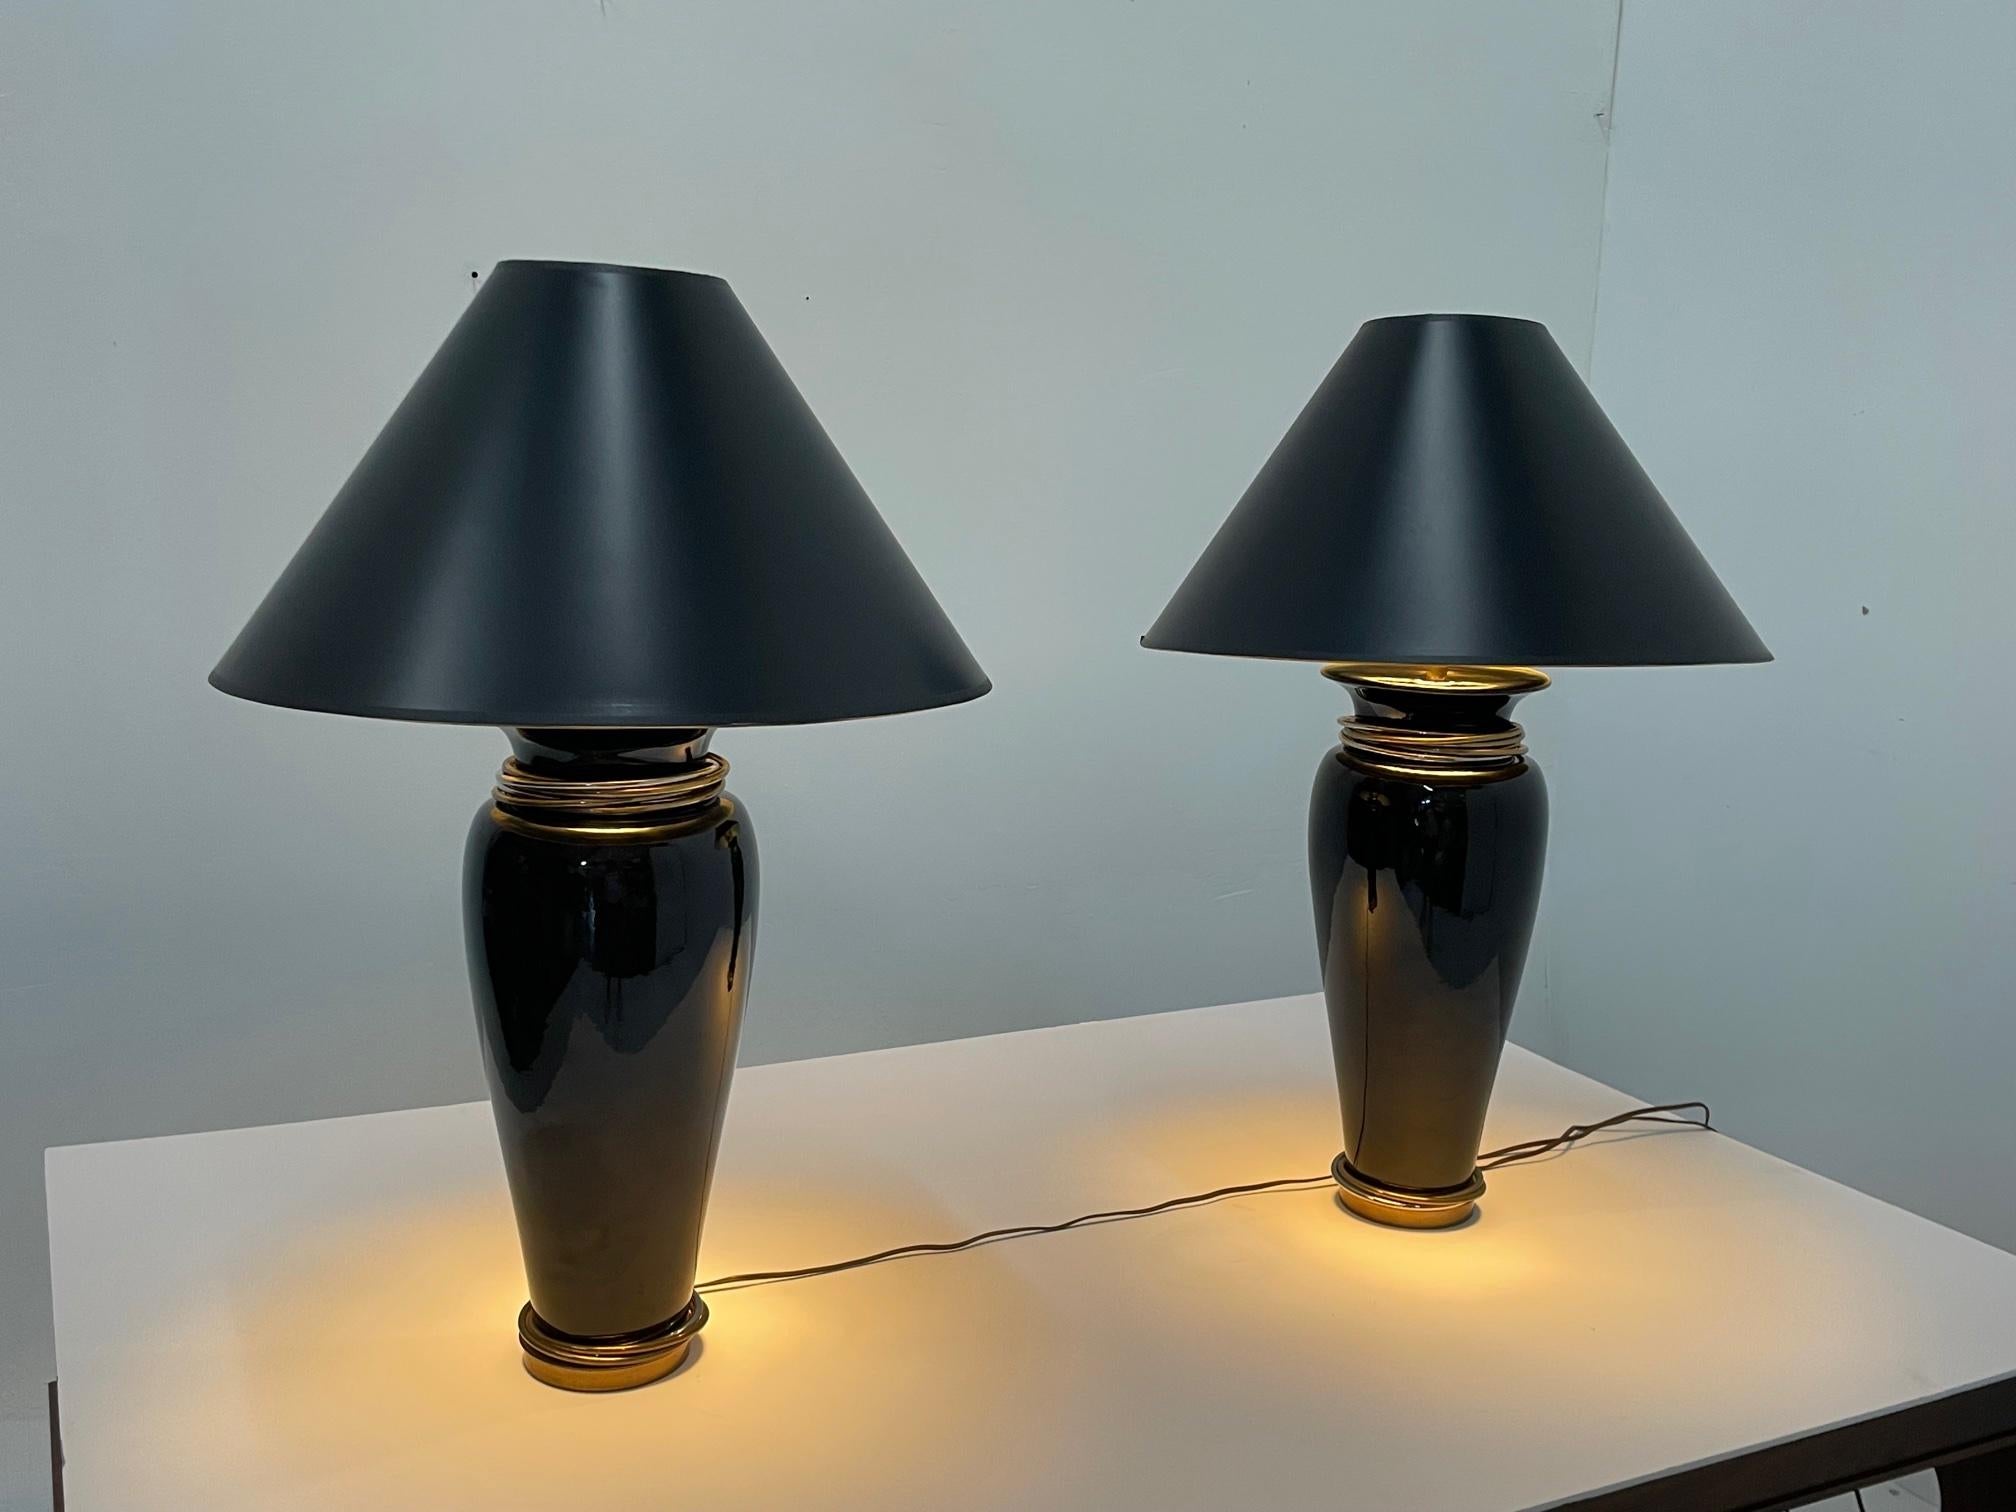 A glamorous pair of high quality black ceramic table lamps having handsome steel and brass rings reminiscent of Cartier trinity rings. 25